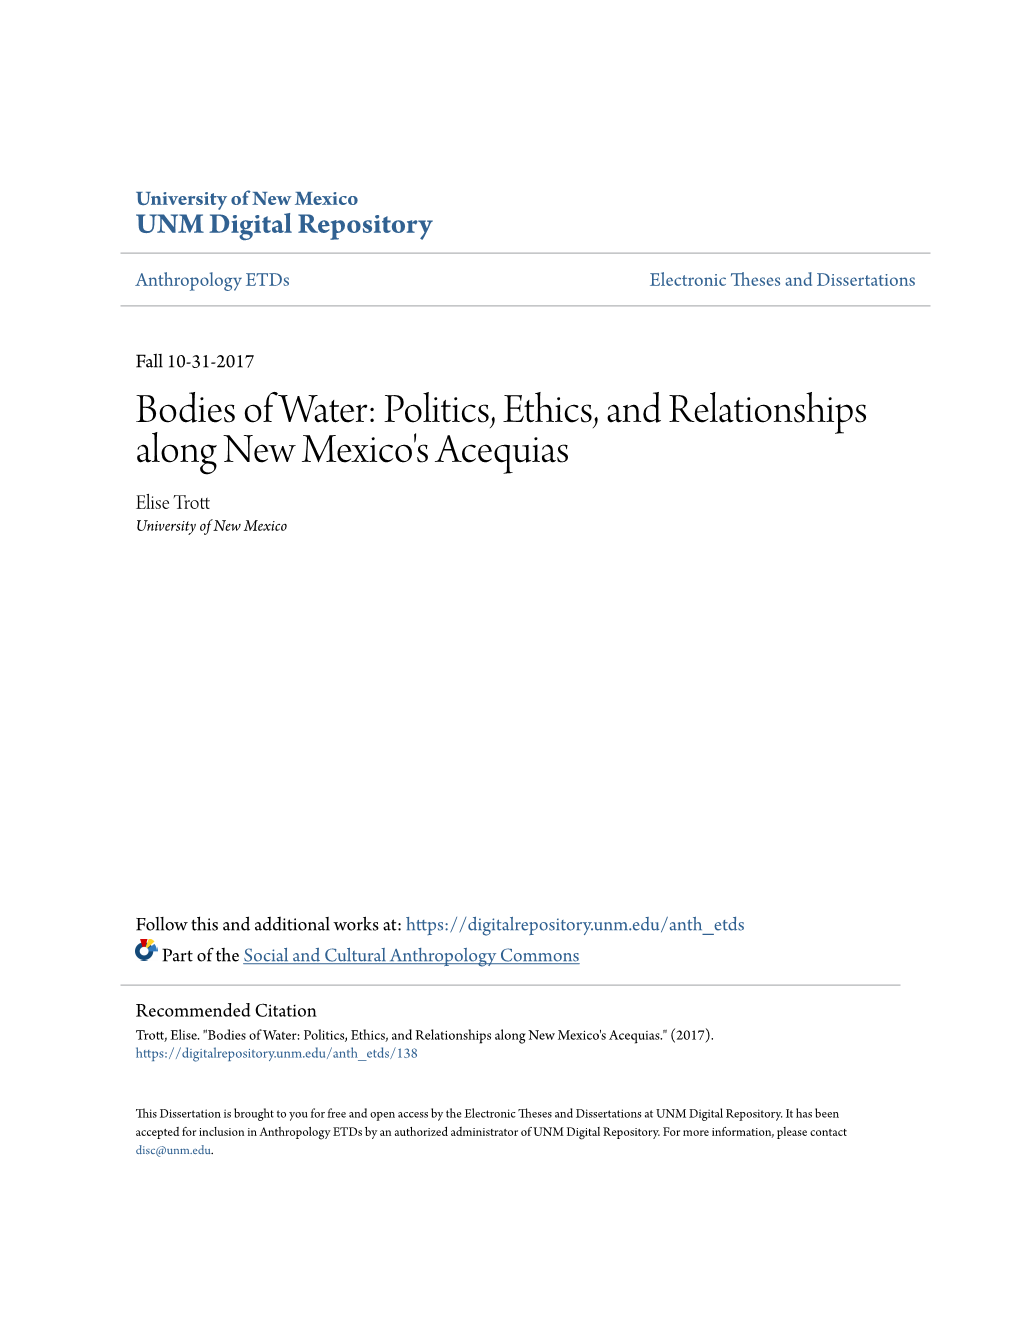 Bodies of Water: Politics, Ethics, and Relationships Along New Mexico's Acequias Elise Trott University of New Mexico